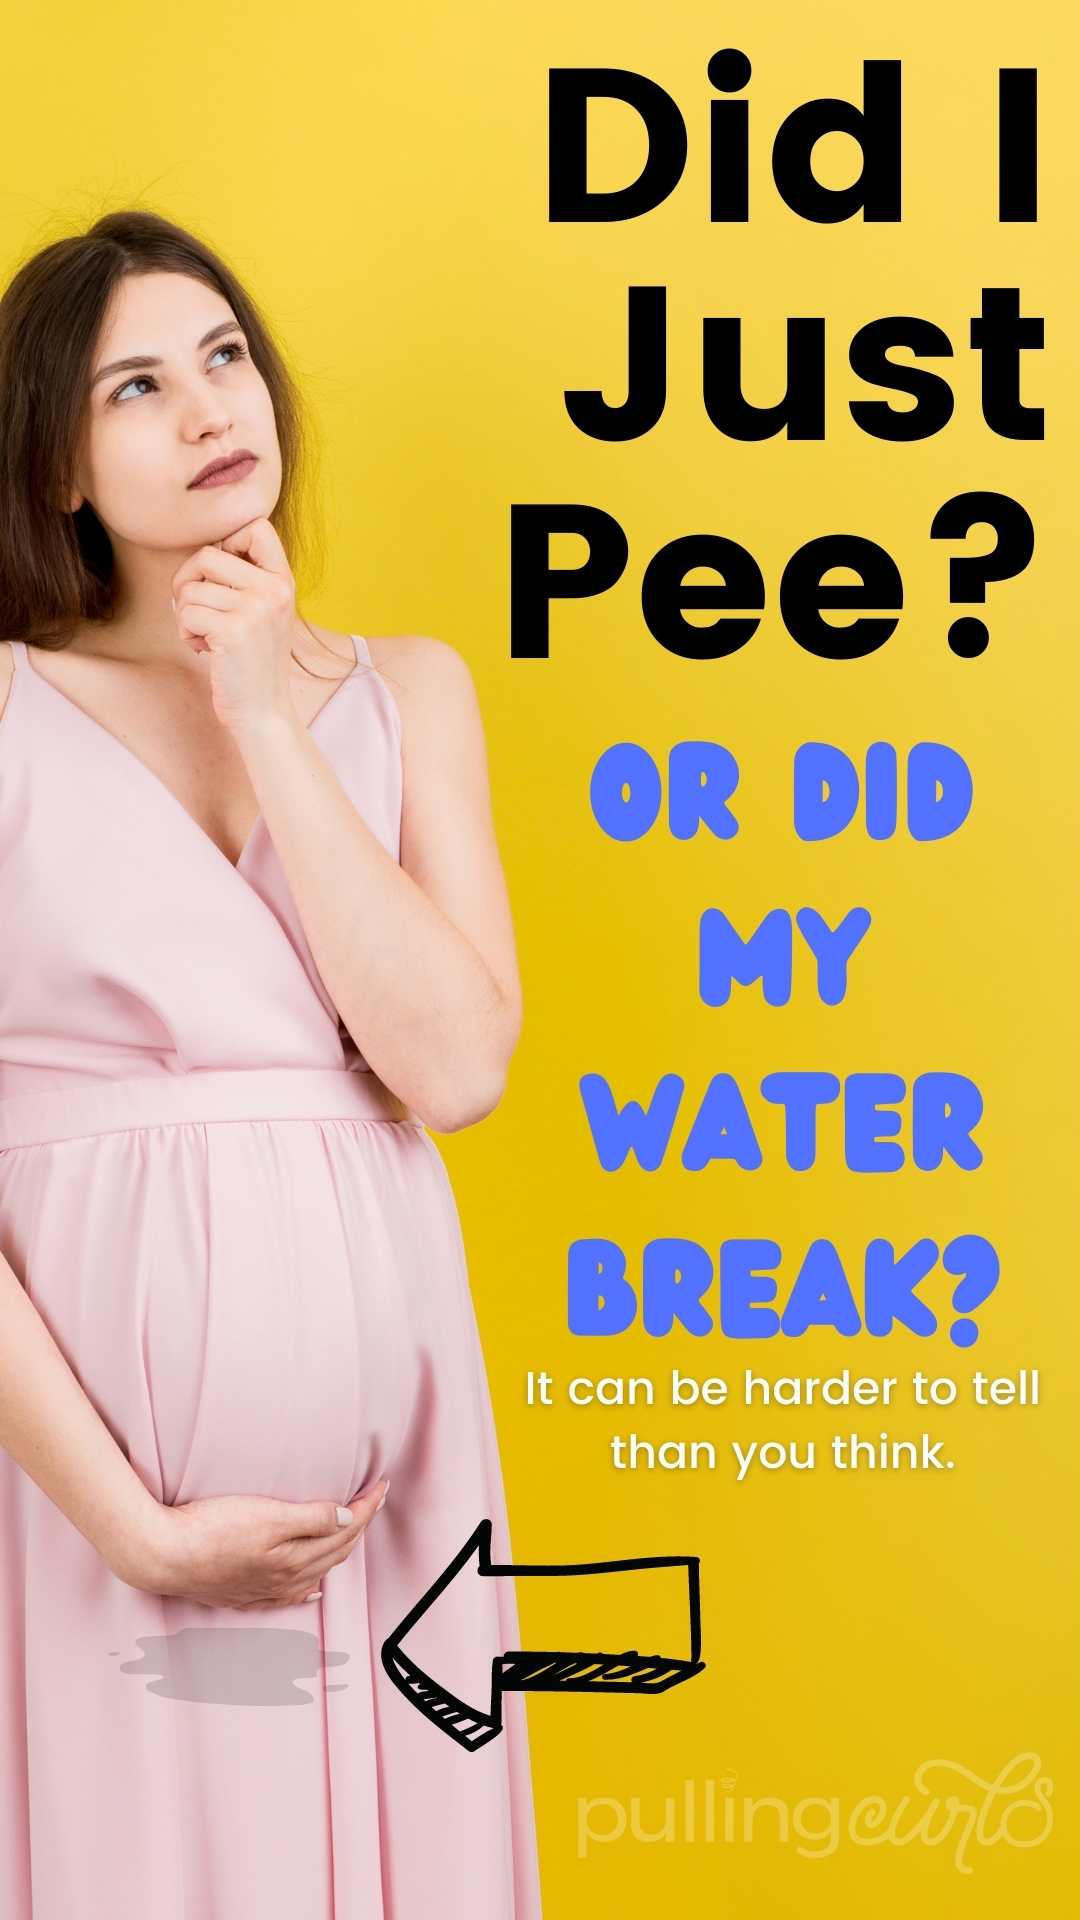 How Do I Know If My Water Broke? (or if I just peed myself) — PNW